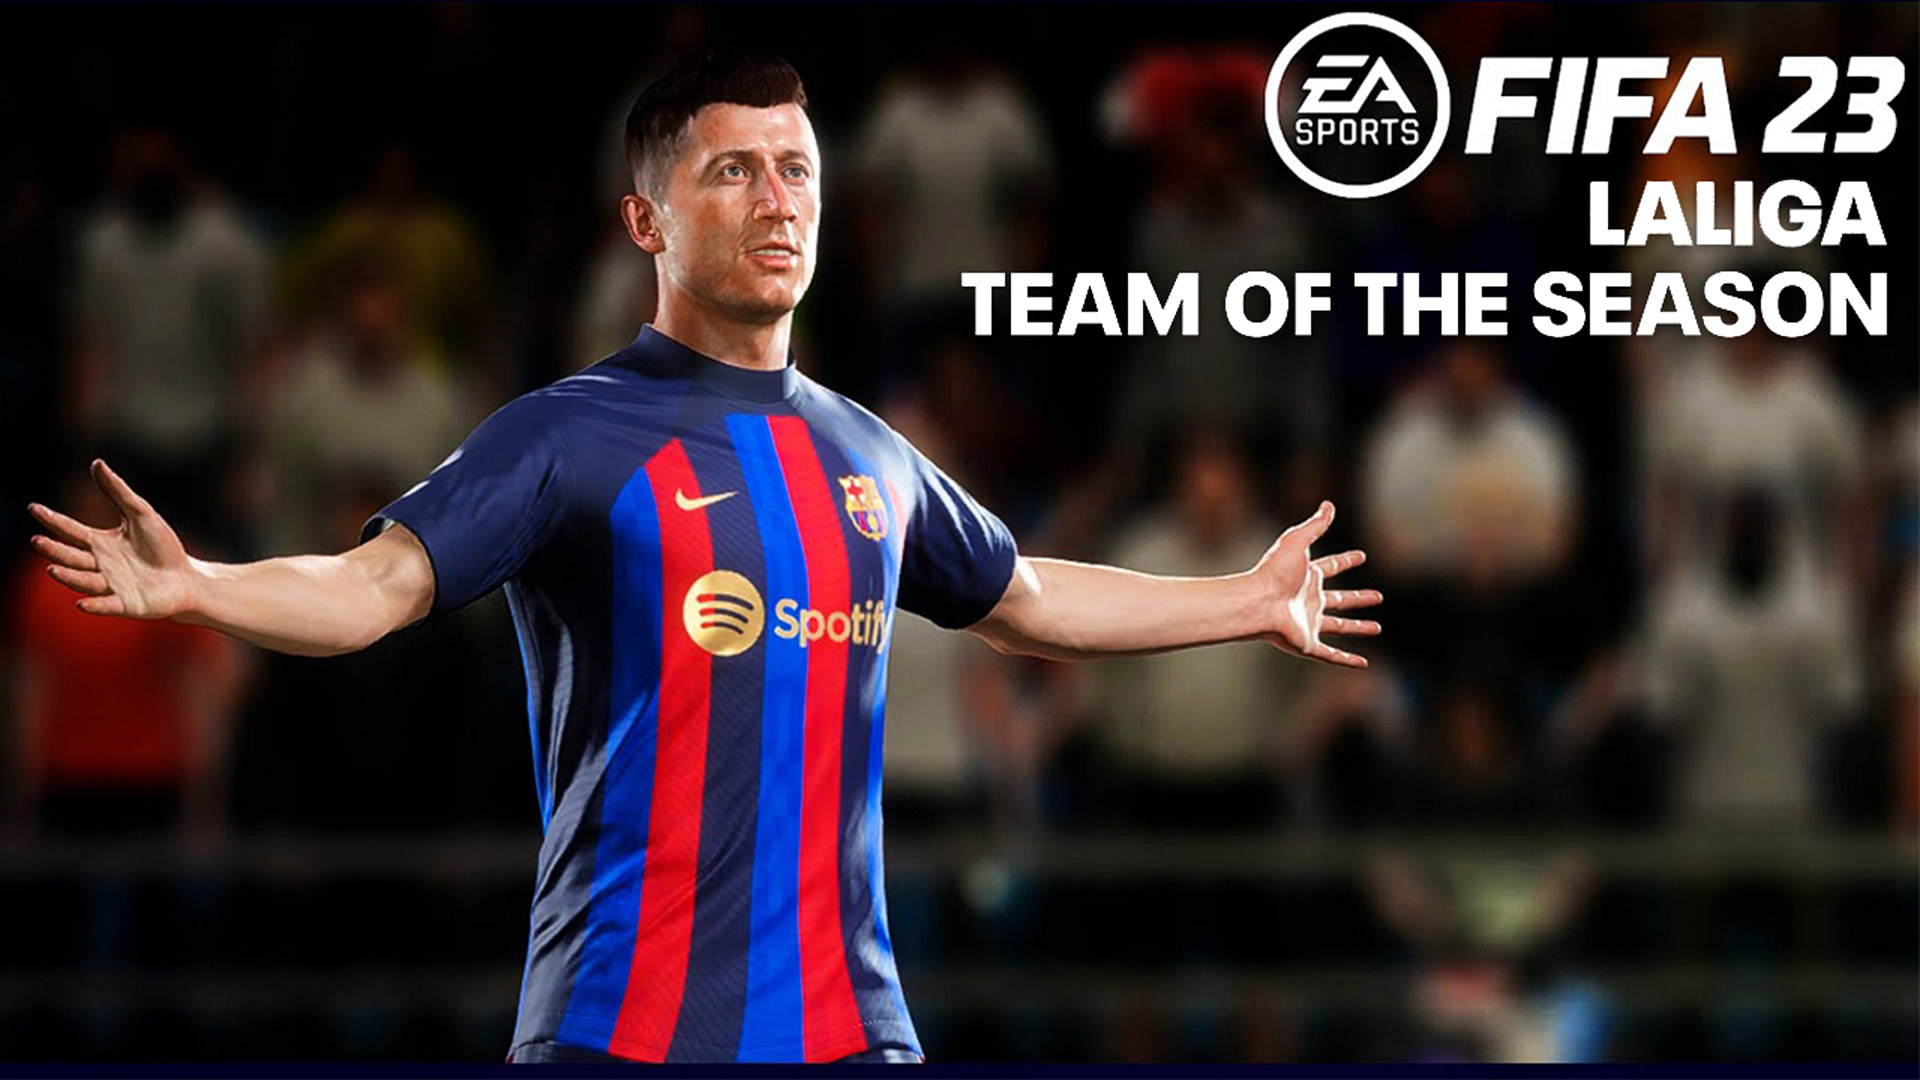 EA Sports FC: Latest leaks reveal the release date - The SportsRush